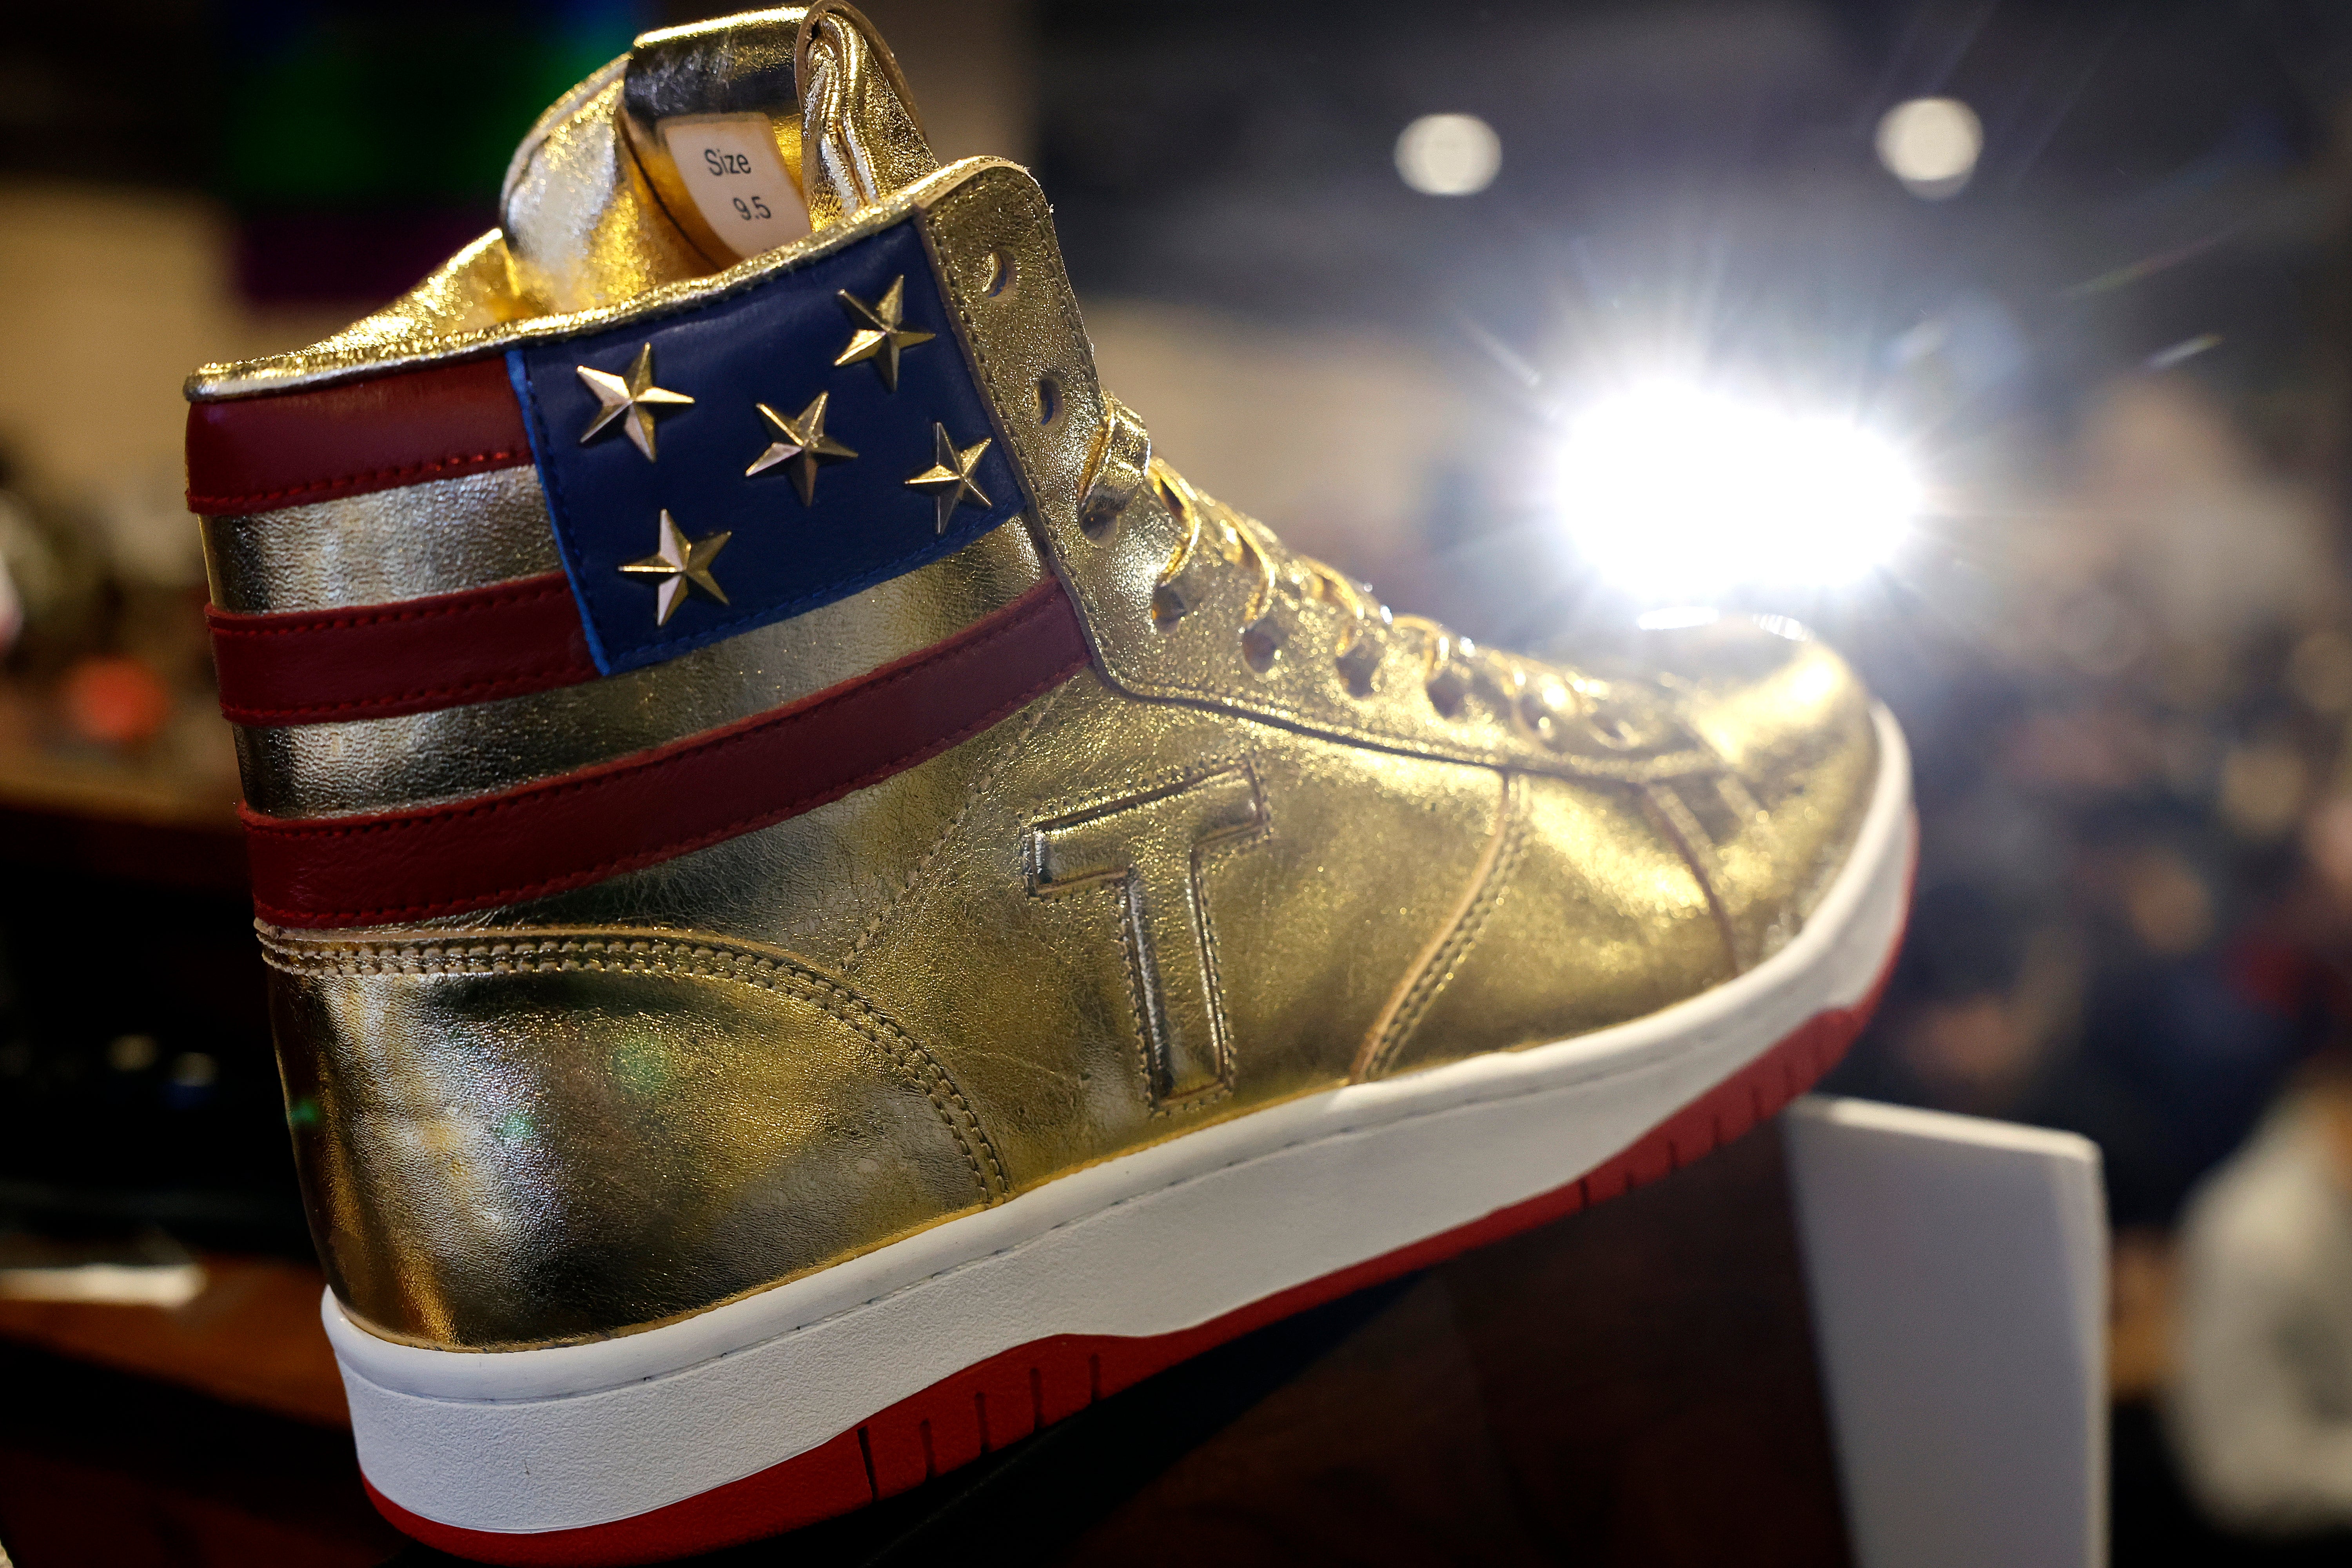 Trump booed as he launches $399 sneaker the day after $350m fraud fine |  The Independent